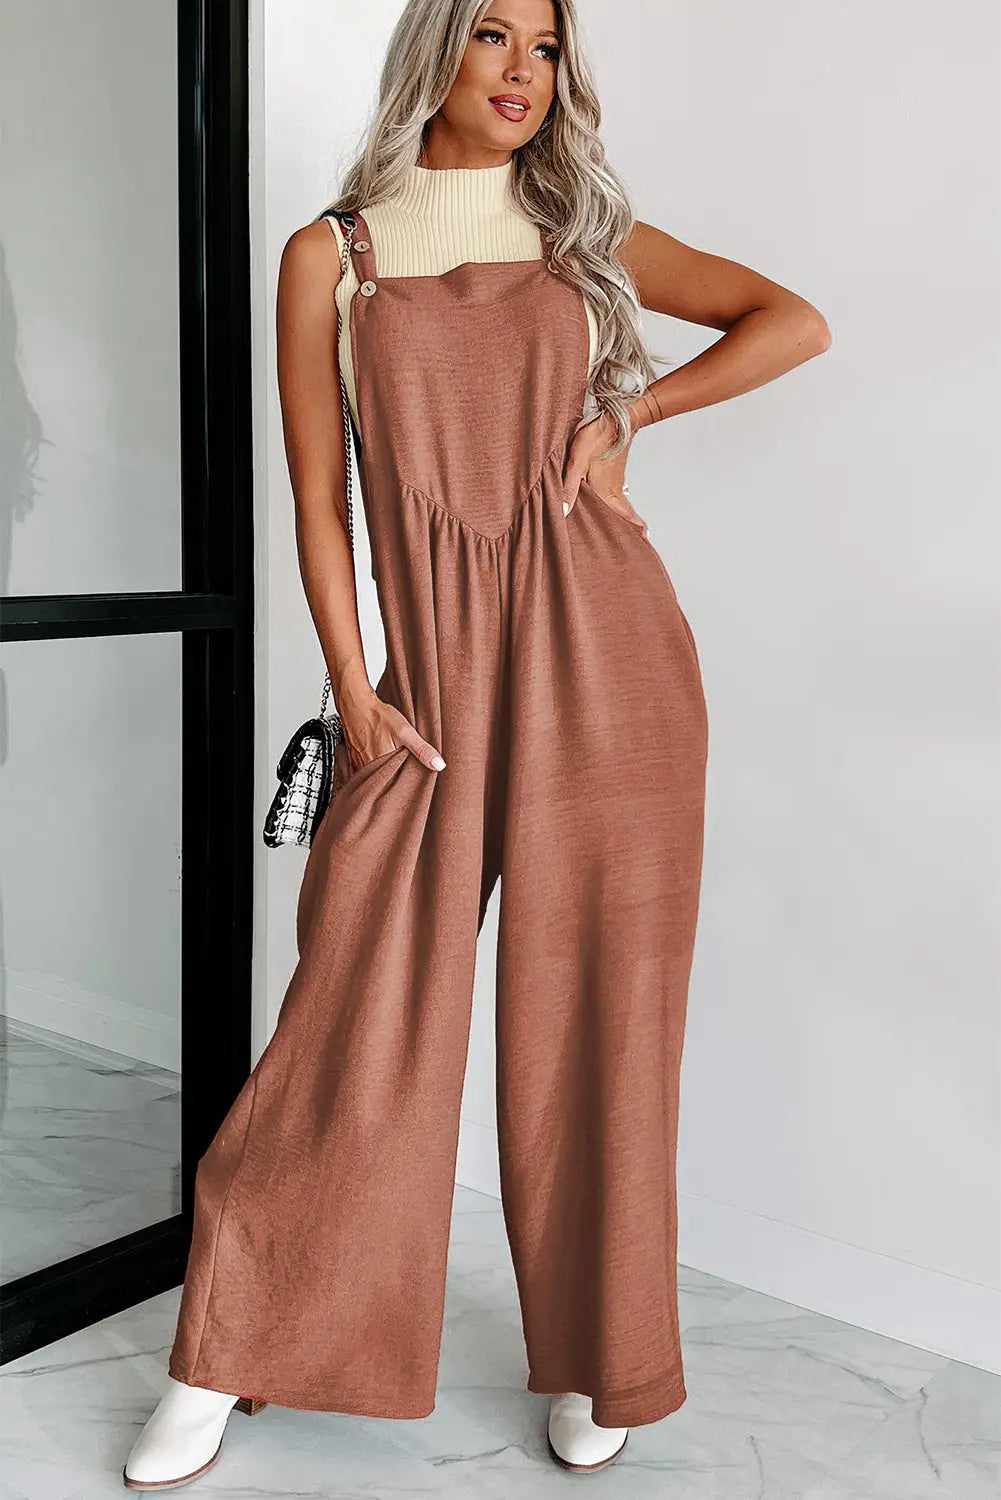 Black textured buttoned straps ruched wide leg jumpsuit - jumpsuits & rompers